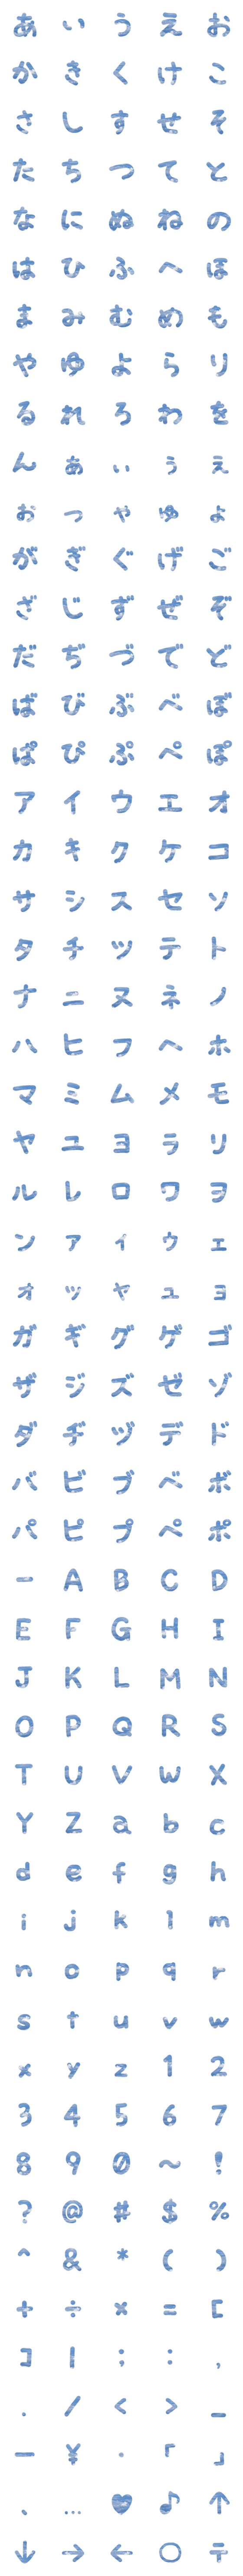 [LINE絵文字]空色のフォントの画像一覧